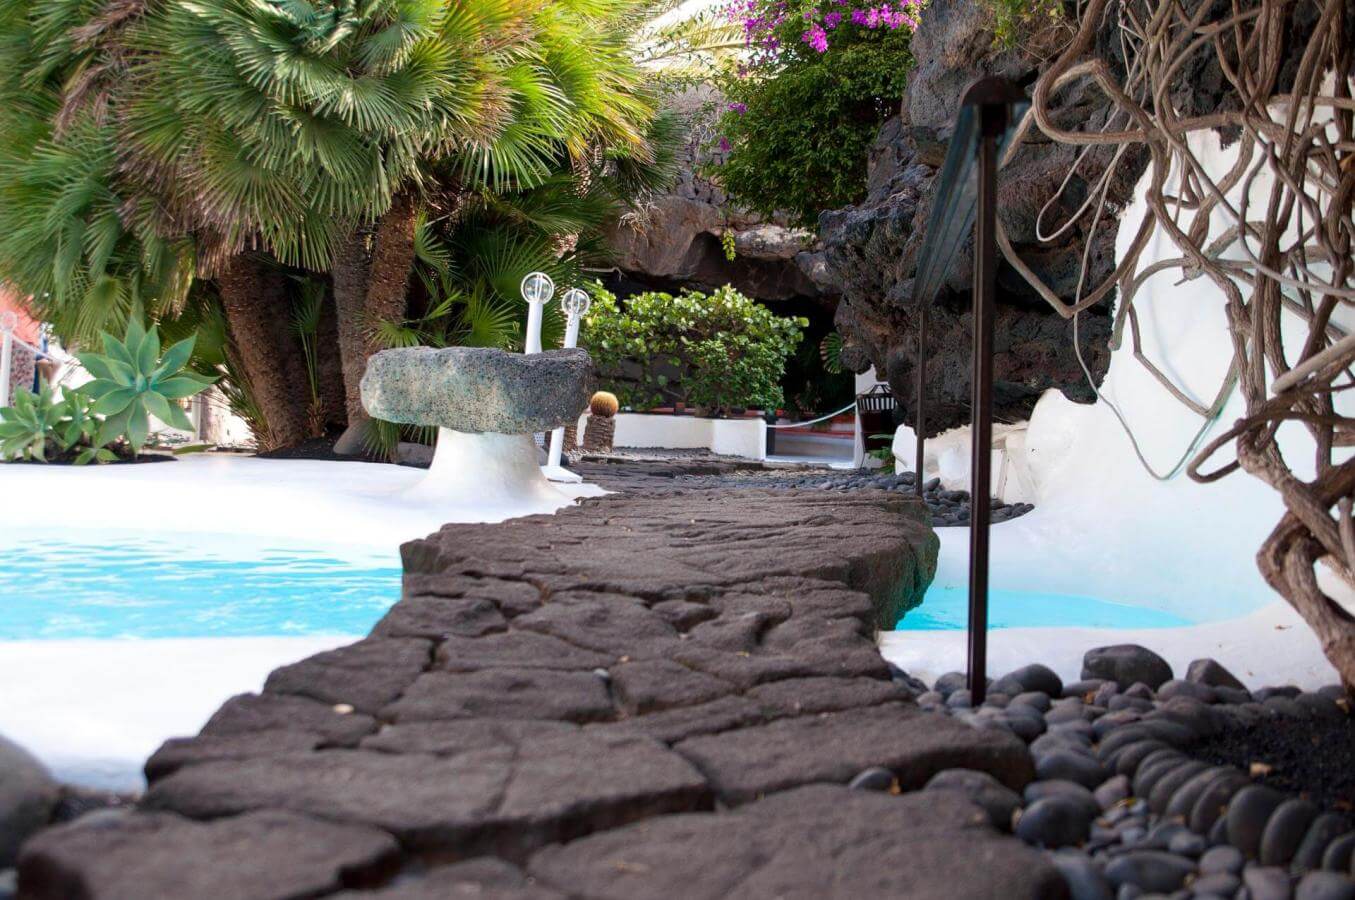 César Manrique, the artist and architect that made Lanzarote's